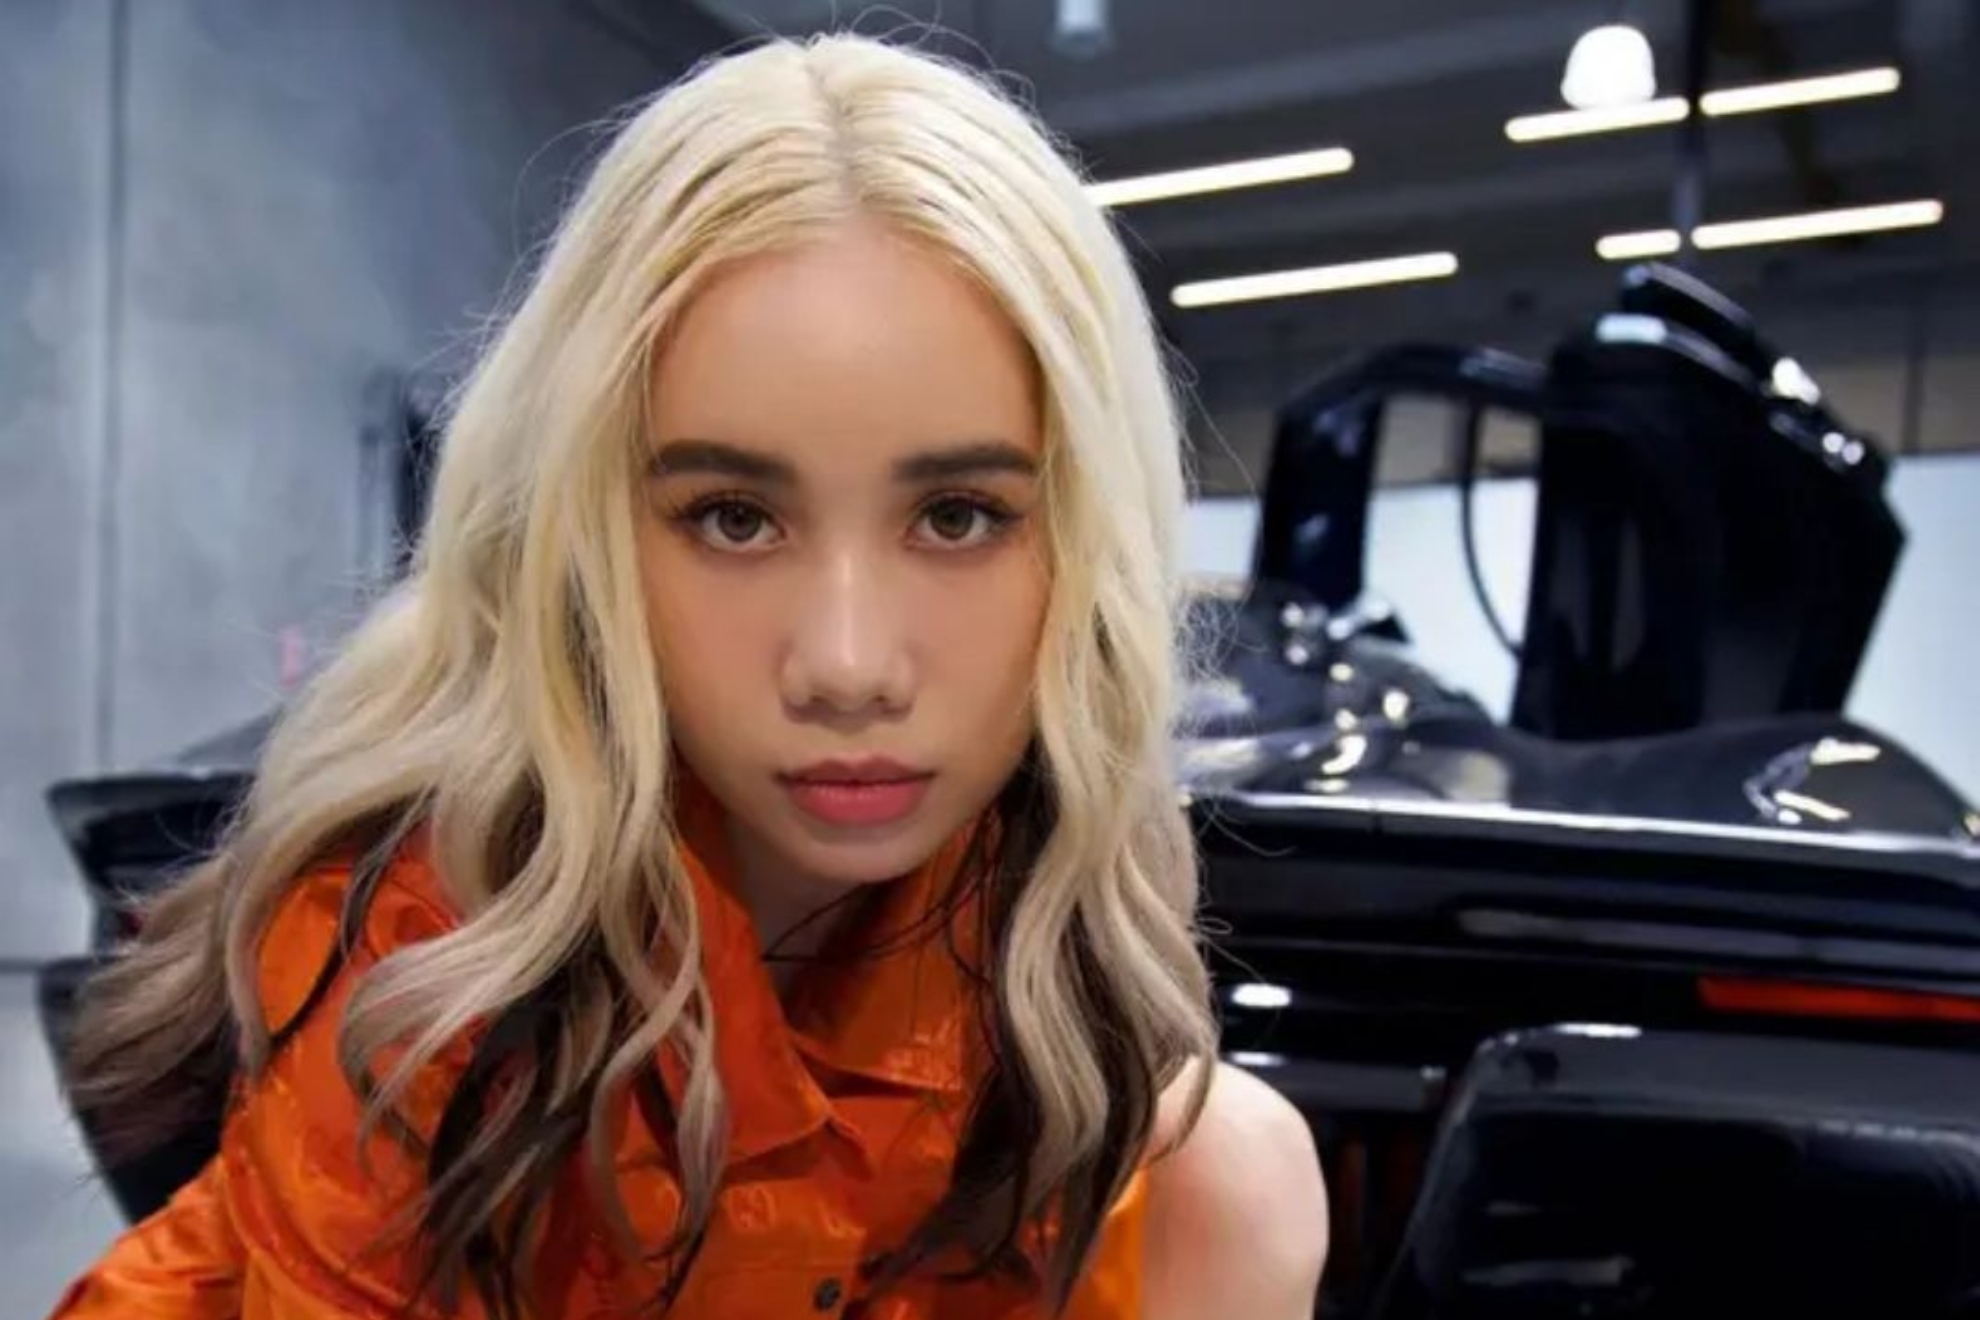 Lil Tay returns with new music video